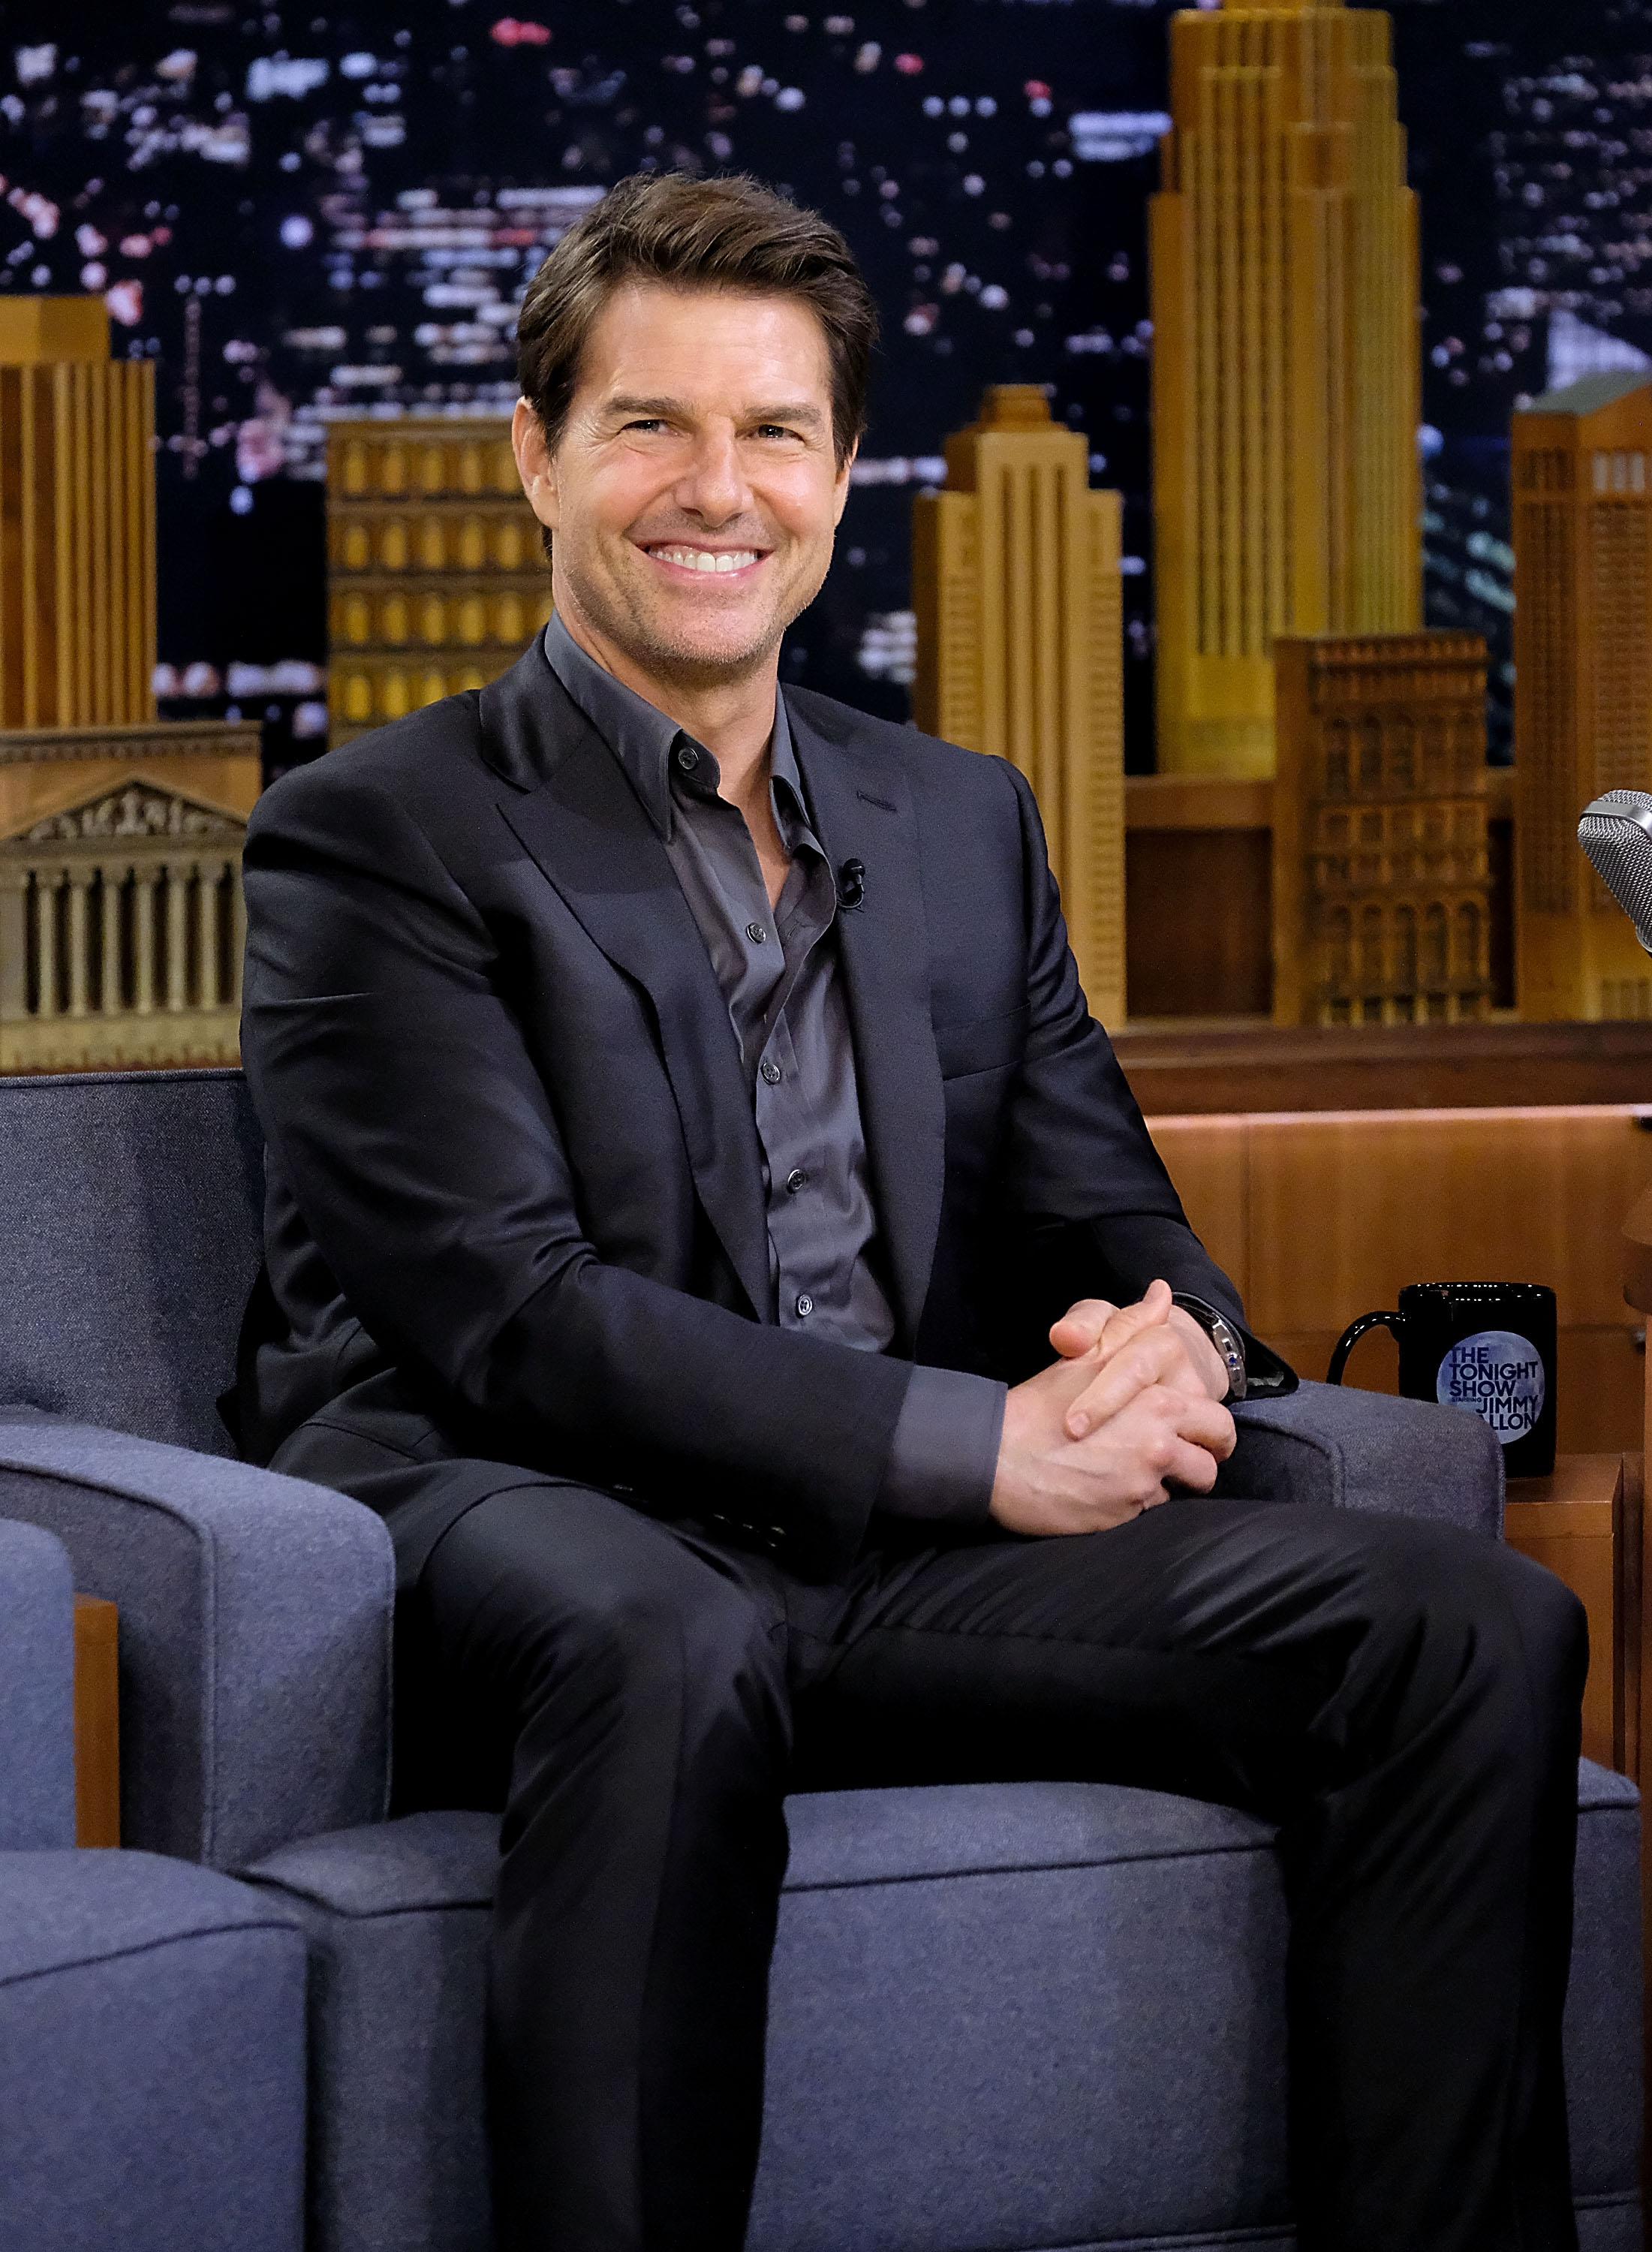 Tom Cruise made a memorable appearance on "The Tonight Show Starring Jimmy Fallon" at Rockefeller Center on July 23, 2018, in New York City. | Source: Getty Images